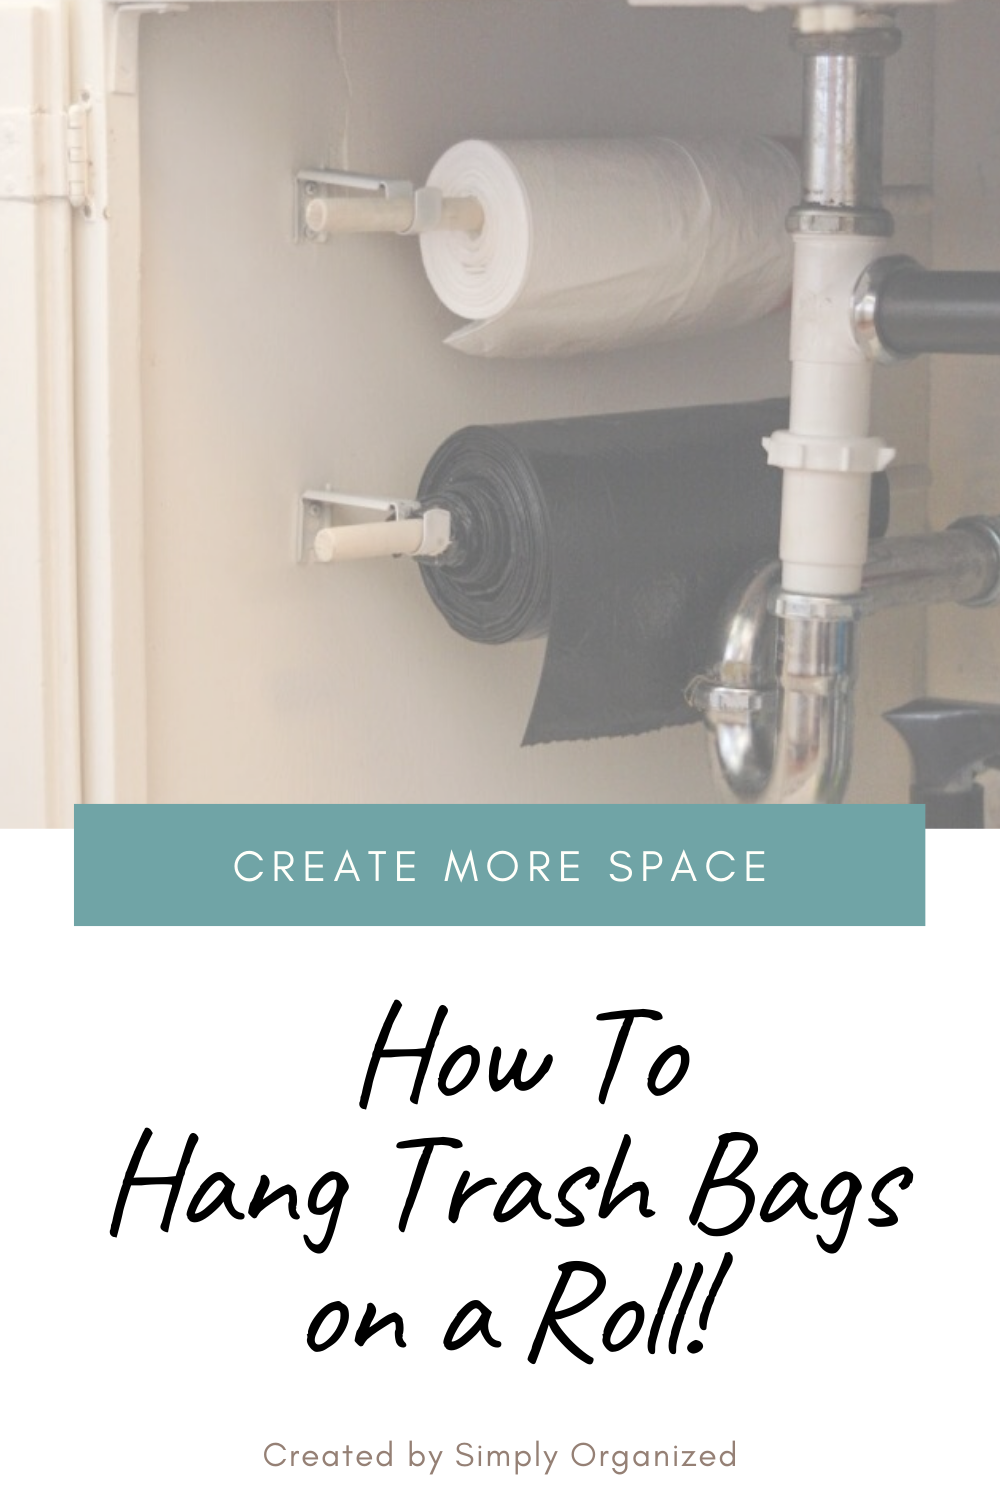 https://simplyorganized.me/wp-content/uploads/2014/01/trash-bags-on-a-roll-easy-diy.png